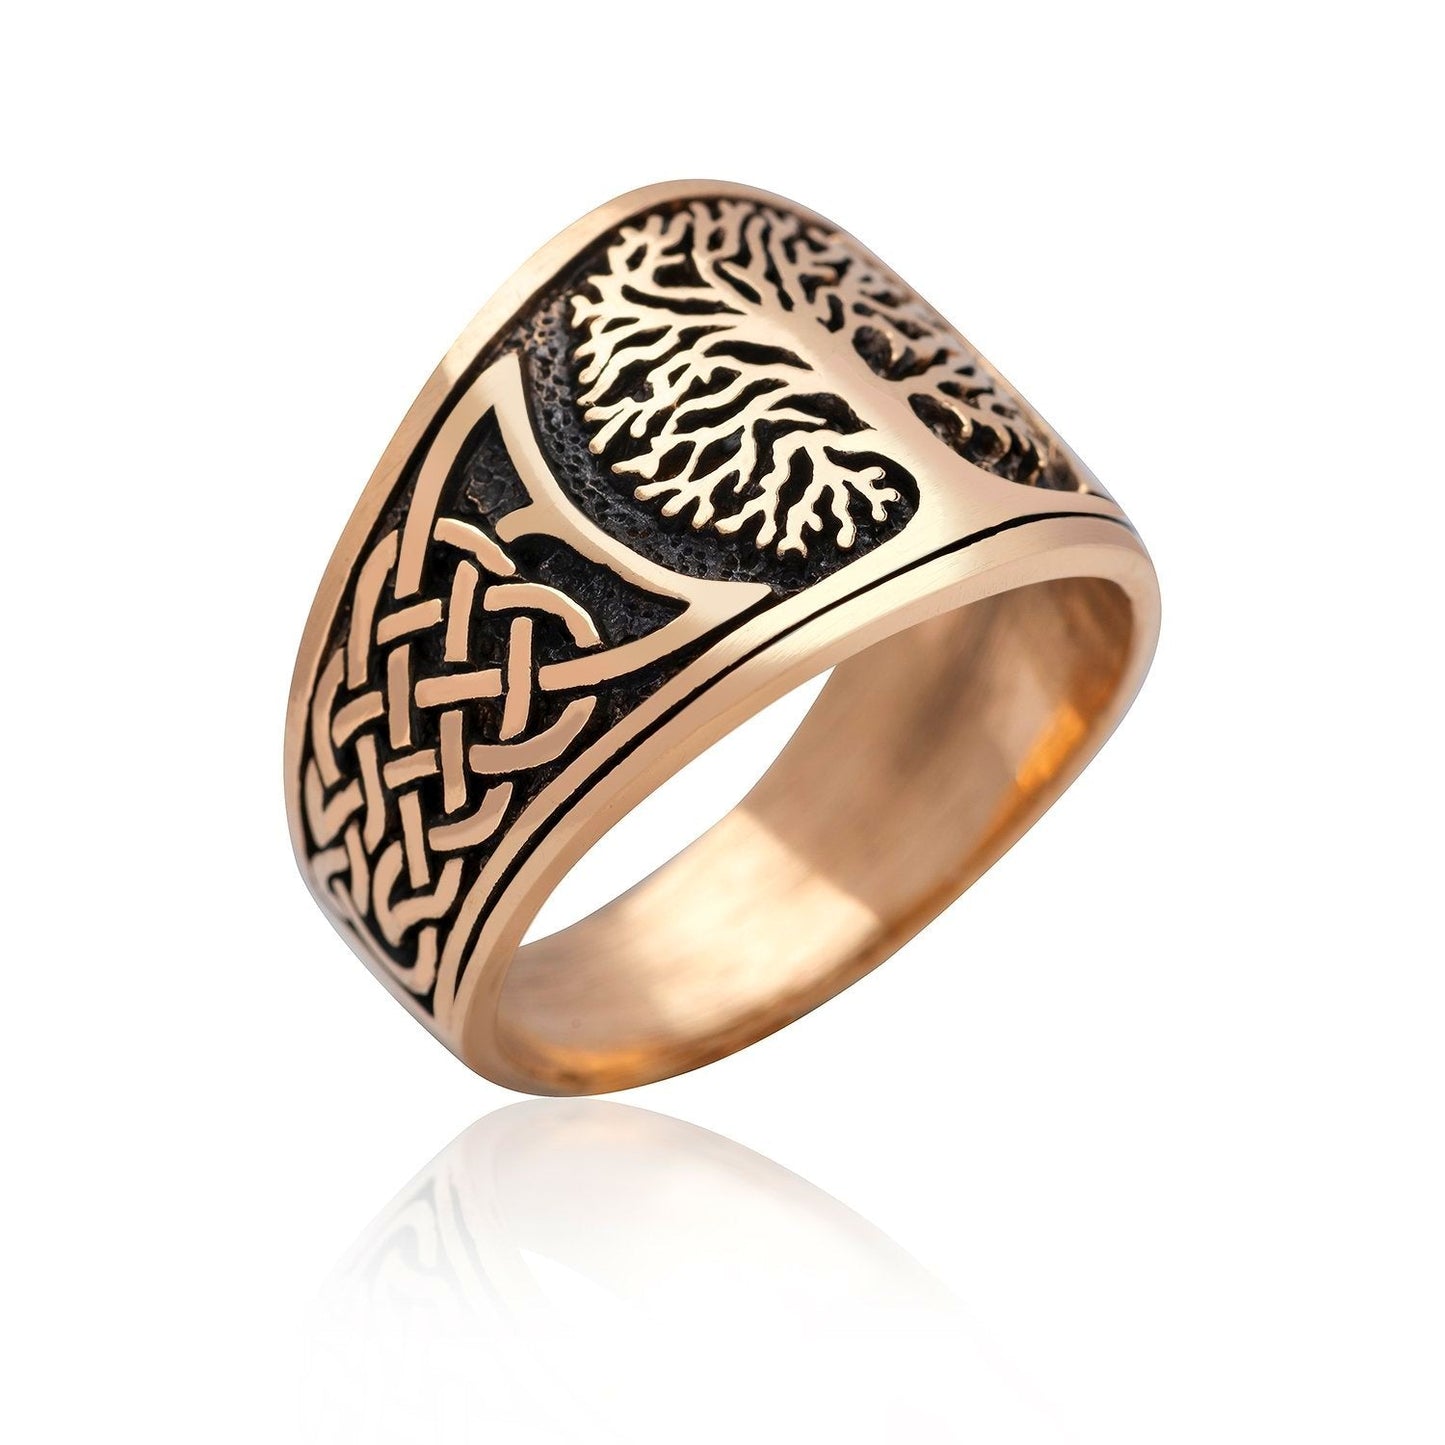 Viking Yggdrasil with Knotwork Bronze Ring - SilverMania925